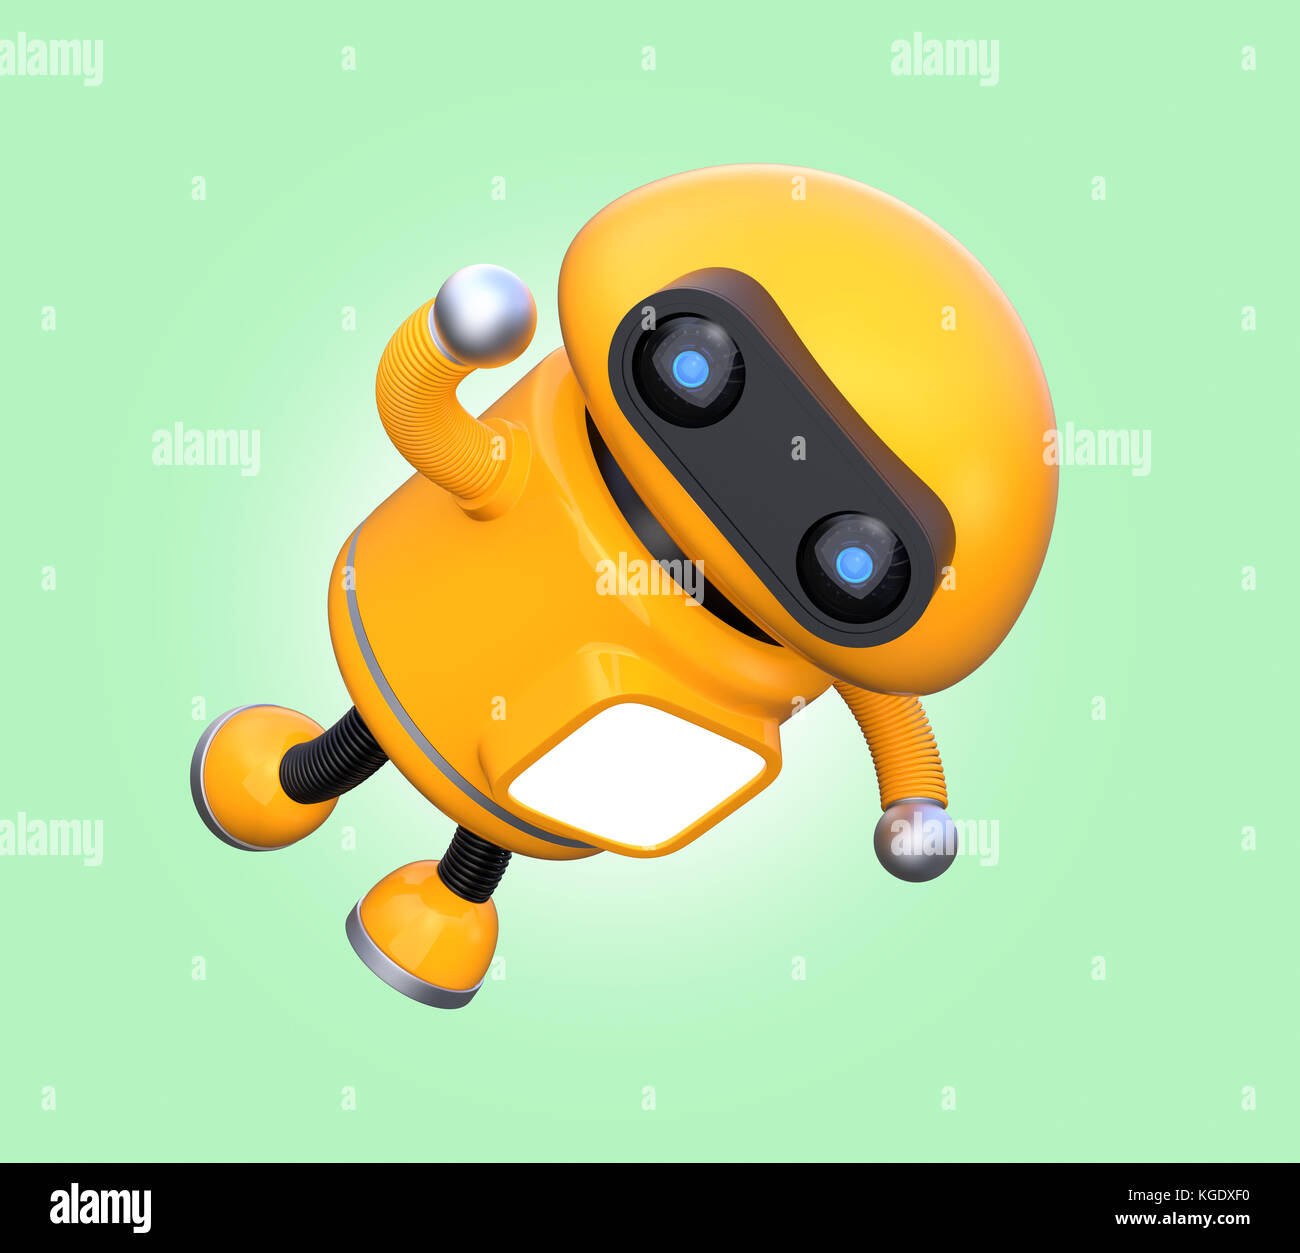 Cute orange robot is floating in the air. 3D rendering image. Stock Photo